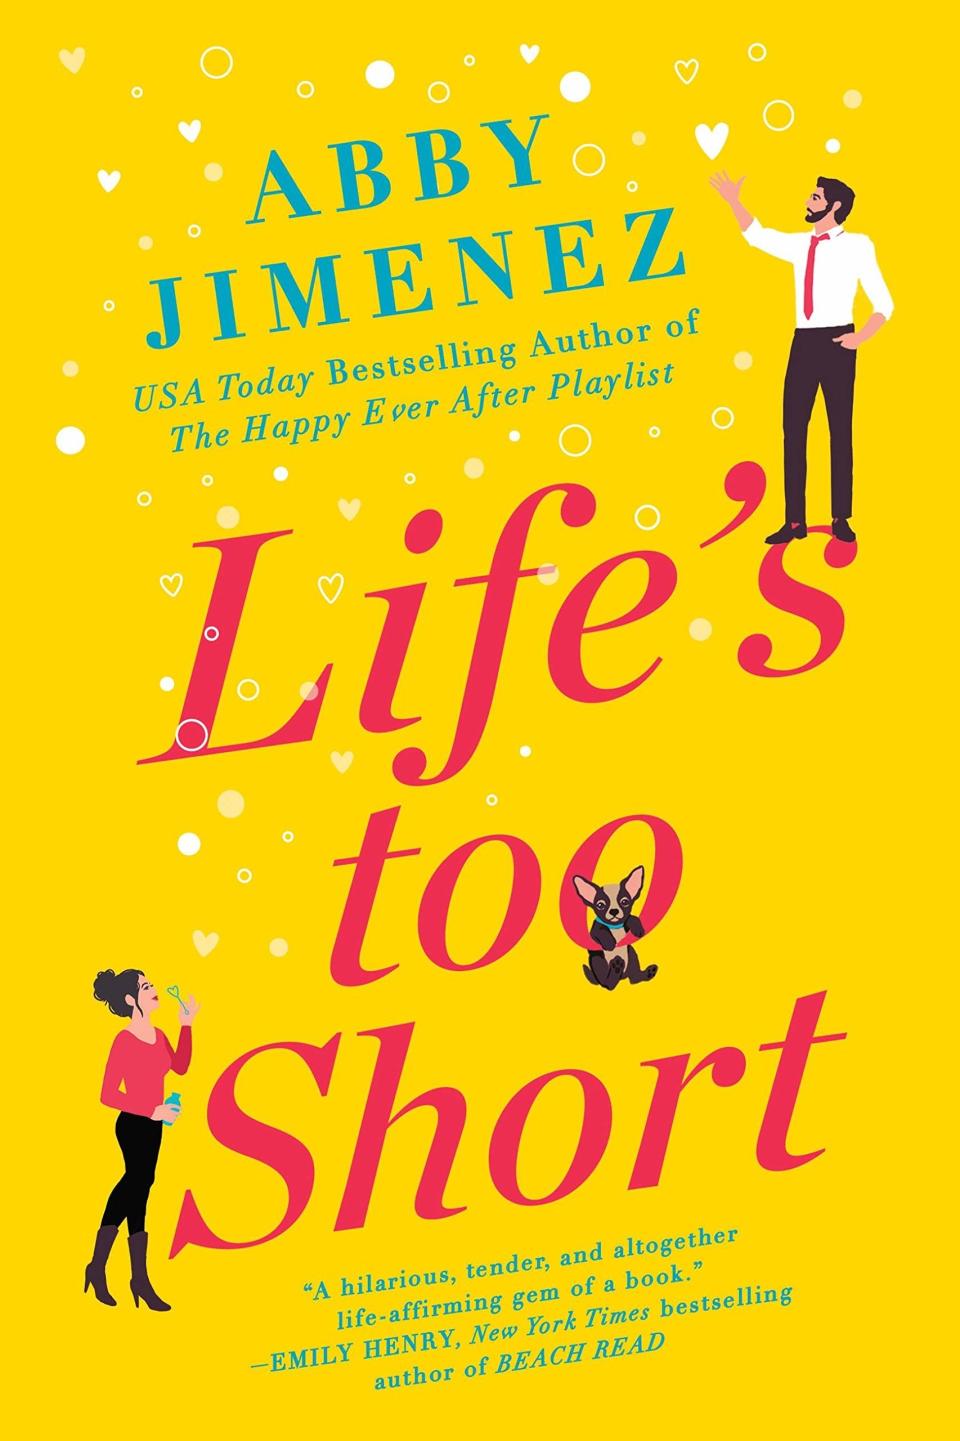 While this is the third book in Jimenez's The Friend Zone romance series, you don't have to read them in order to enjoy it. Vanessa is an independent, carefree woman who lives life to the fullest. She fears she might have the same fatal genetic condition as her mother, but wants to spend her life living every moment with purpose. Enter the hot lawyer who lives next door: Adrian Copeland. He offers to help Vanessa with her sister's infant daughter, whom she's caring for, and from there, a bond begins to form between them. But Adrian thrives off structure and logic, while Vanessa is more go-with-the-flow...does this hinder things for them long-term, especially when feelings are growing stronger? —Farrah Penn